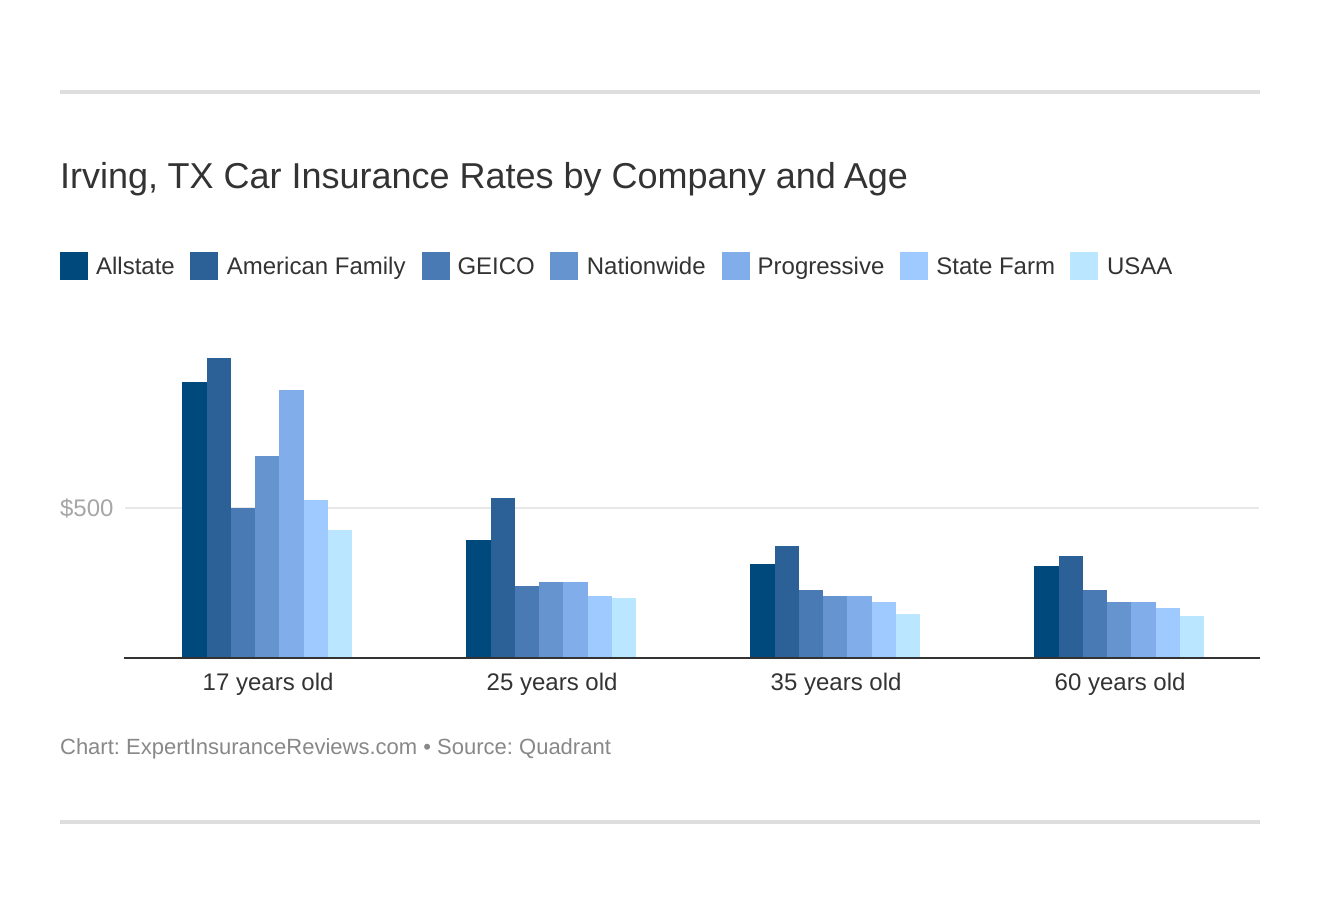 Irving, TX Car Insurance Rates by Company and Age